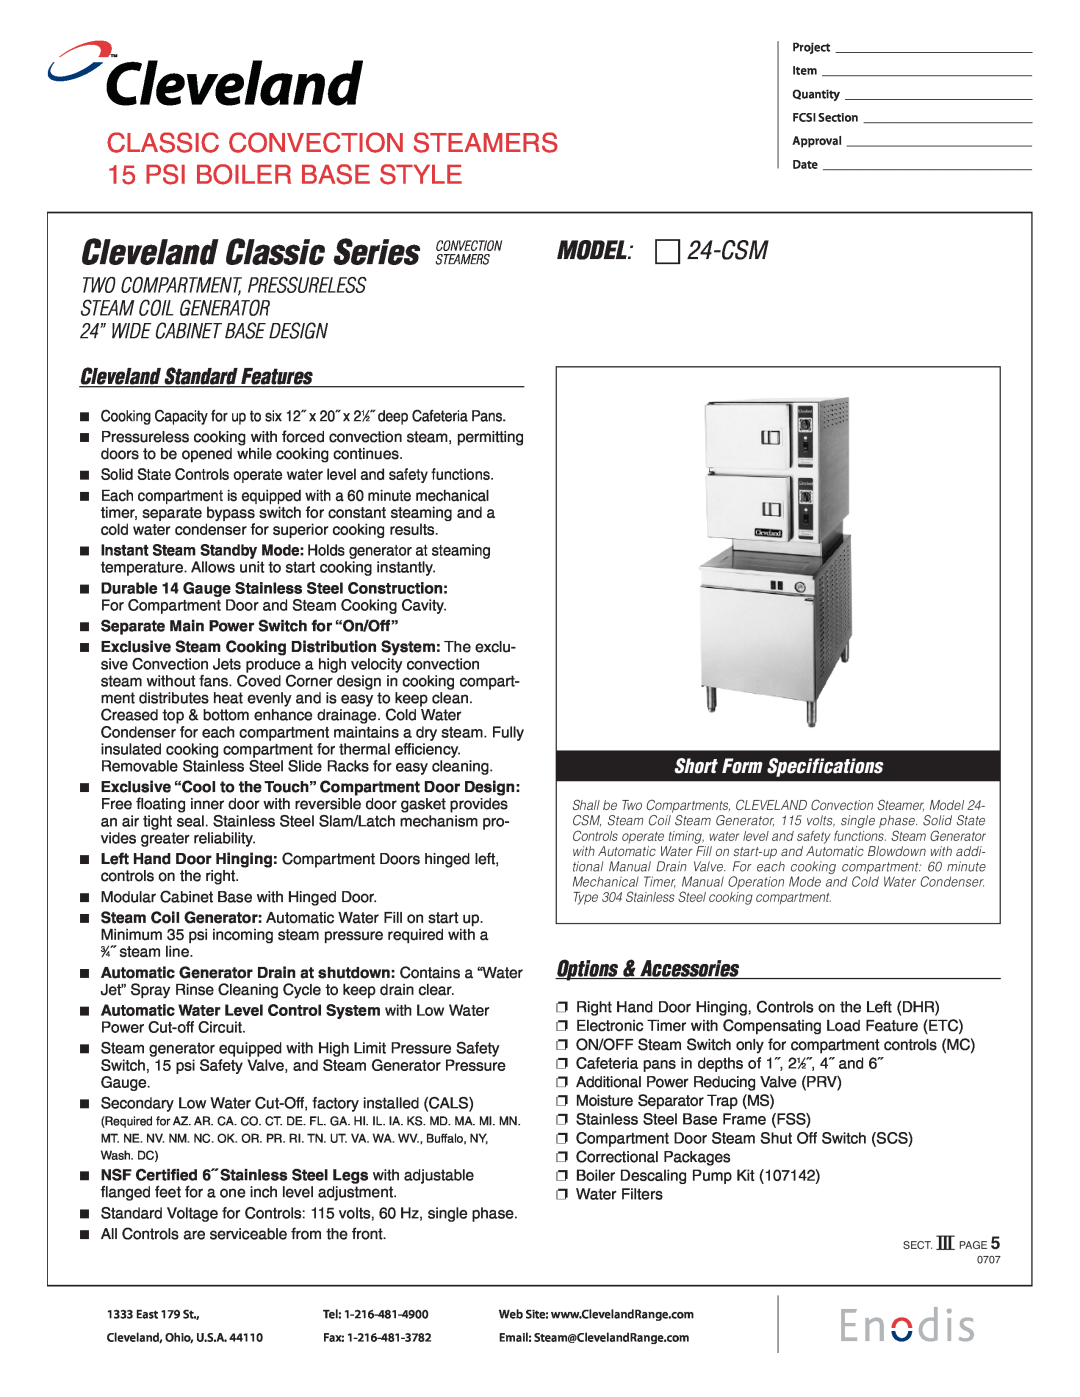 Cleveland Range specifications Cleveland Classic Series CONVECTION, MODEL χ 24-CSM, Cleveland Standard Features 